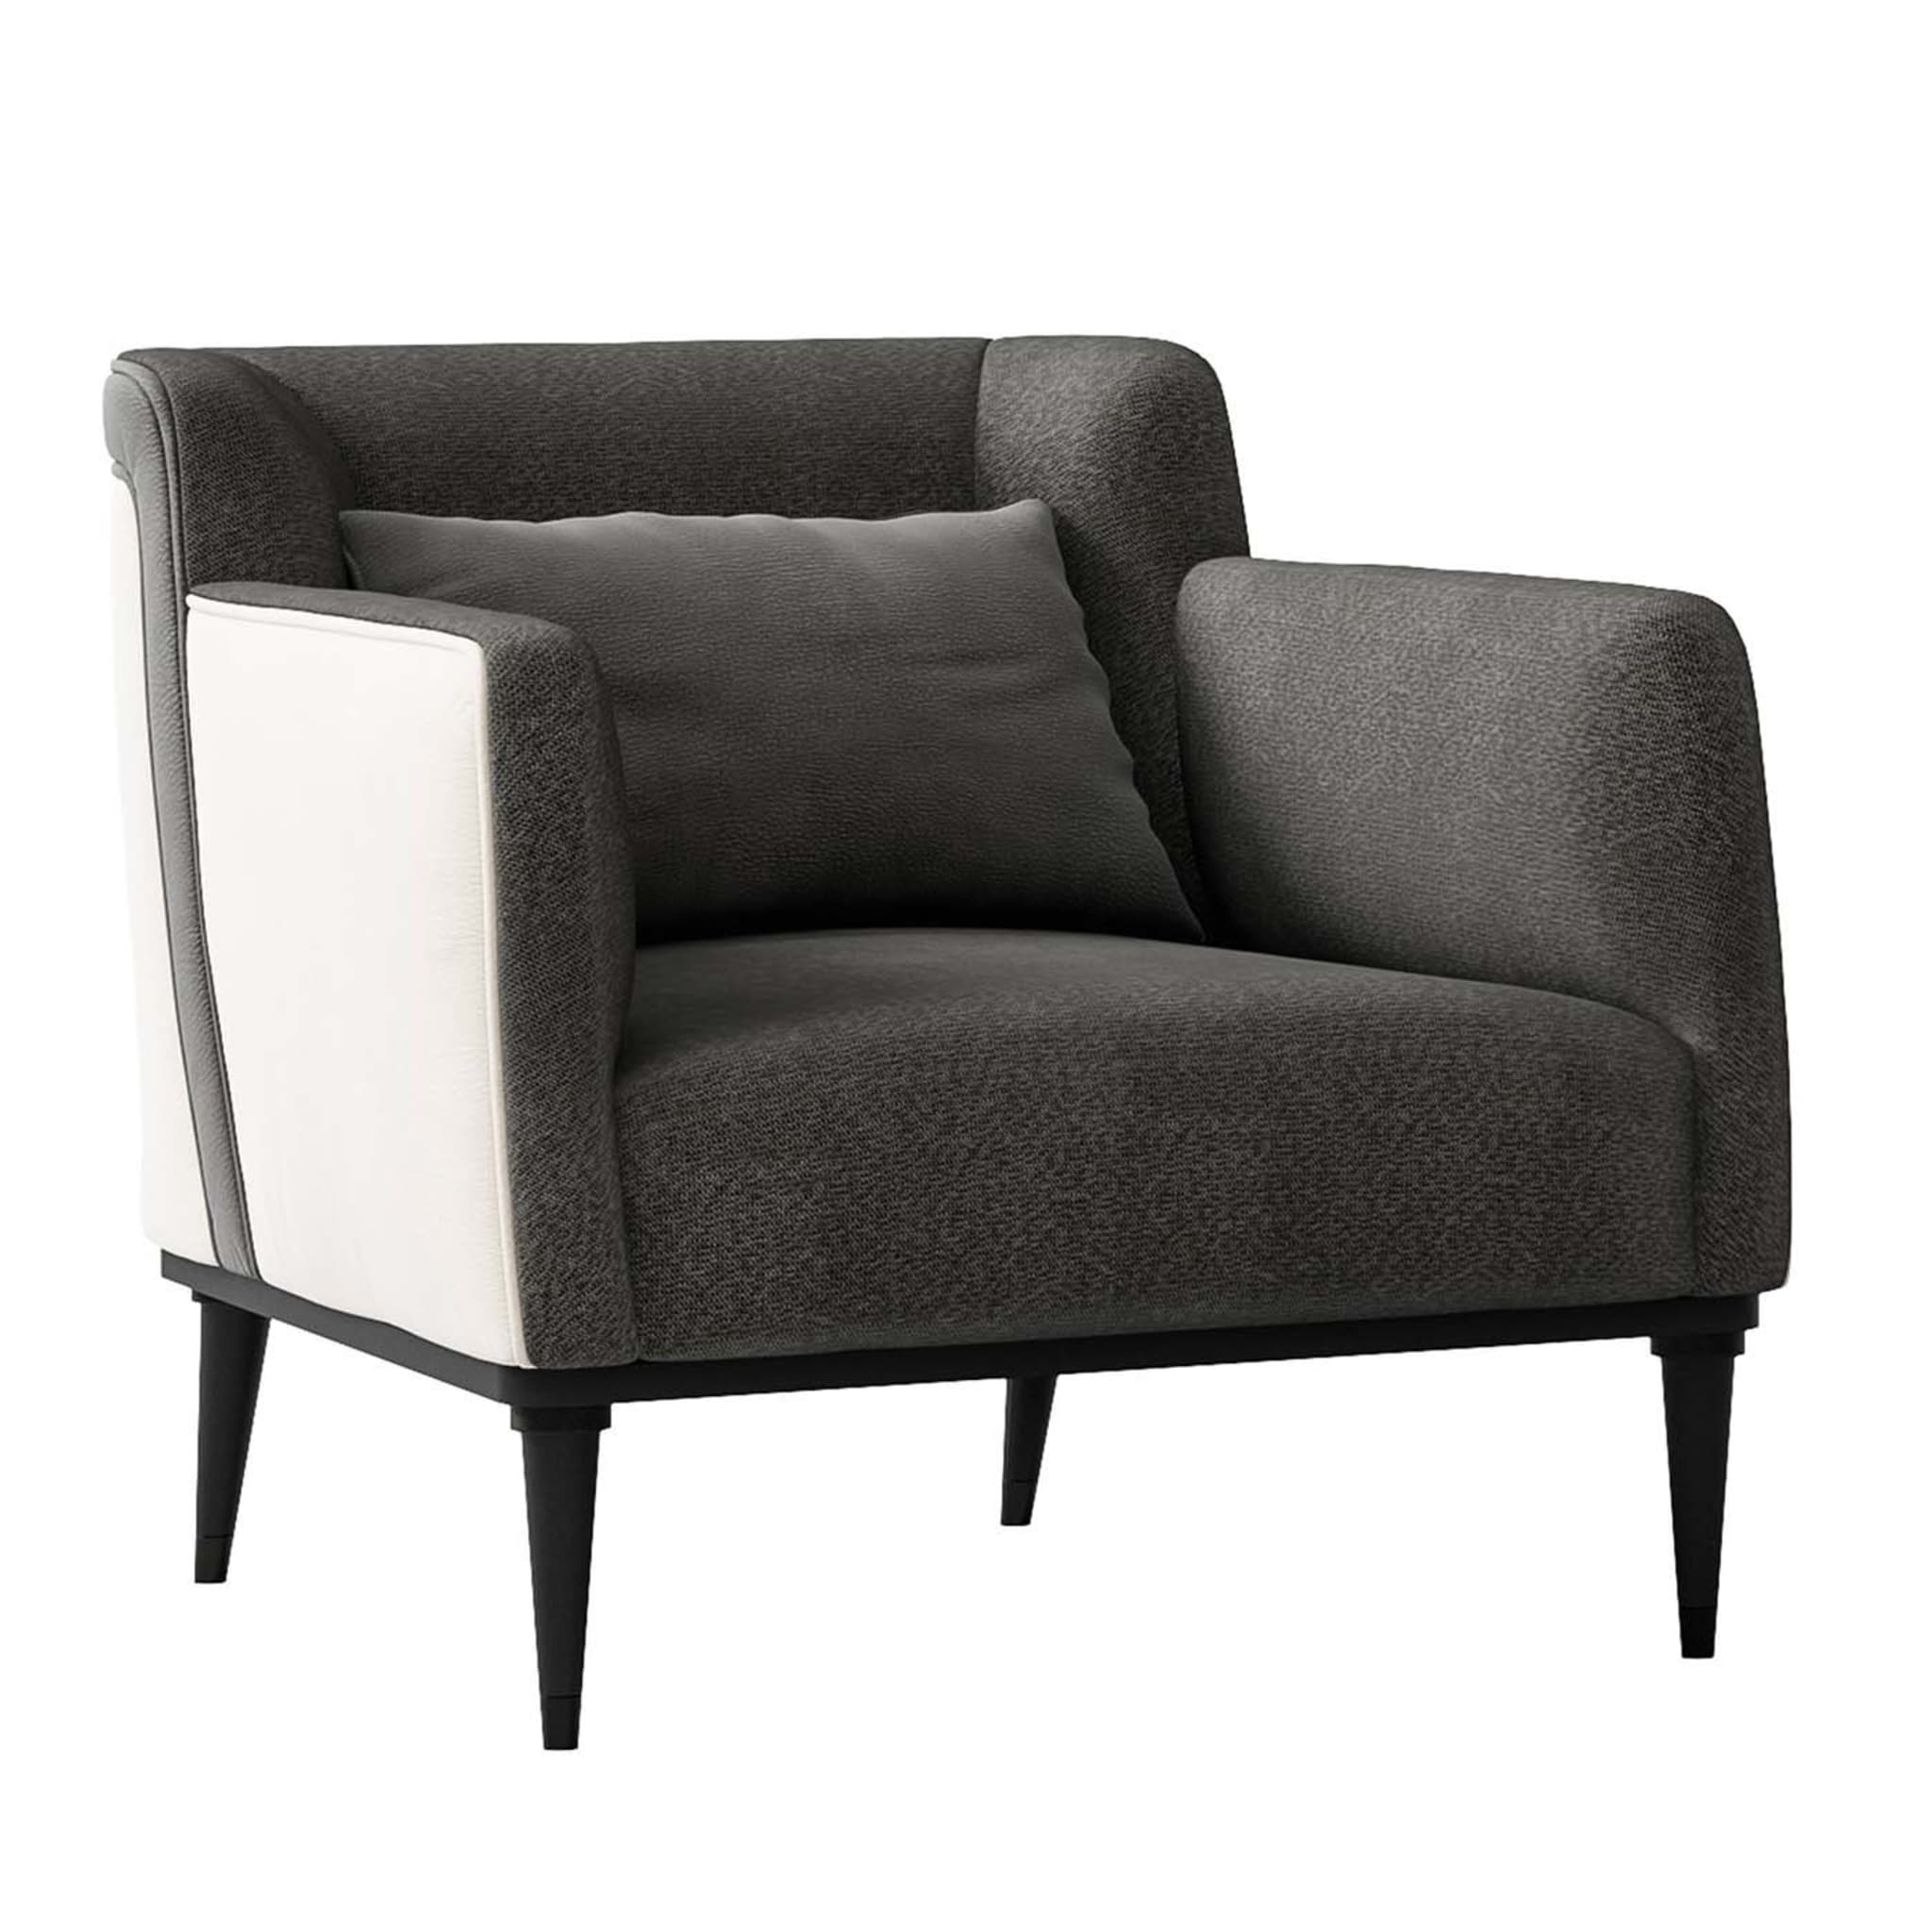 Black and White Leather Armchair - Main view